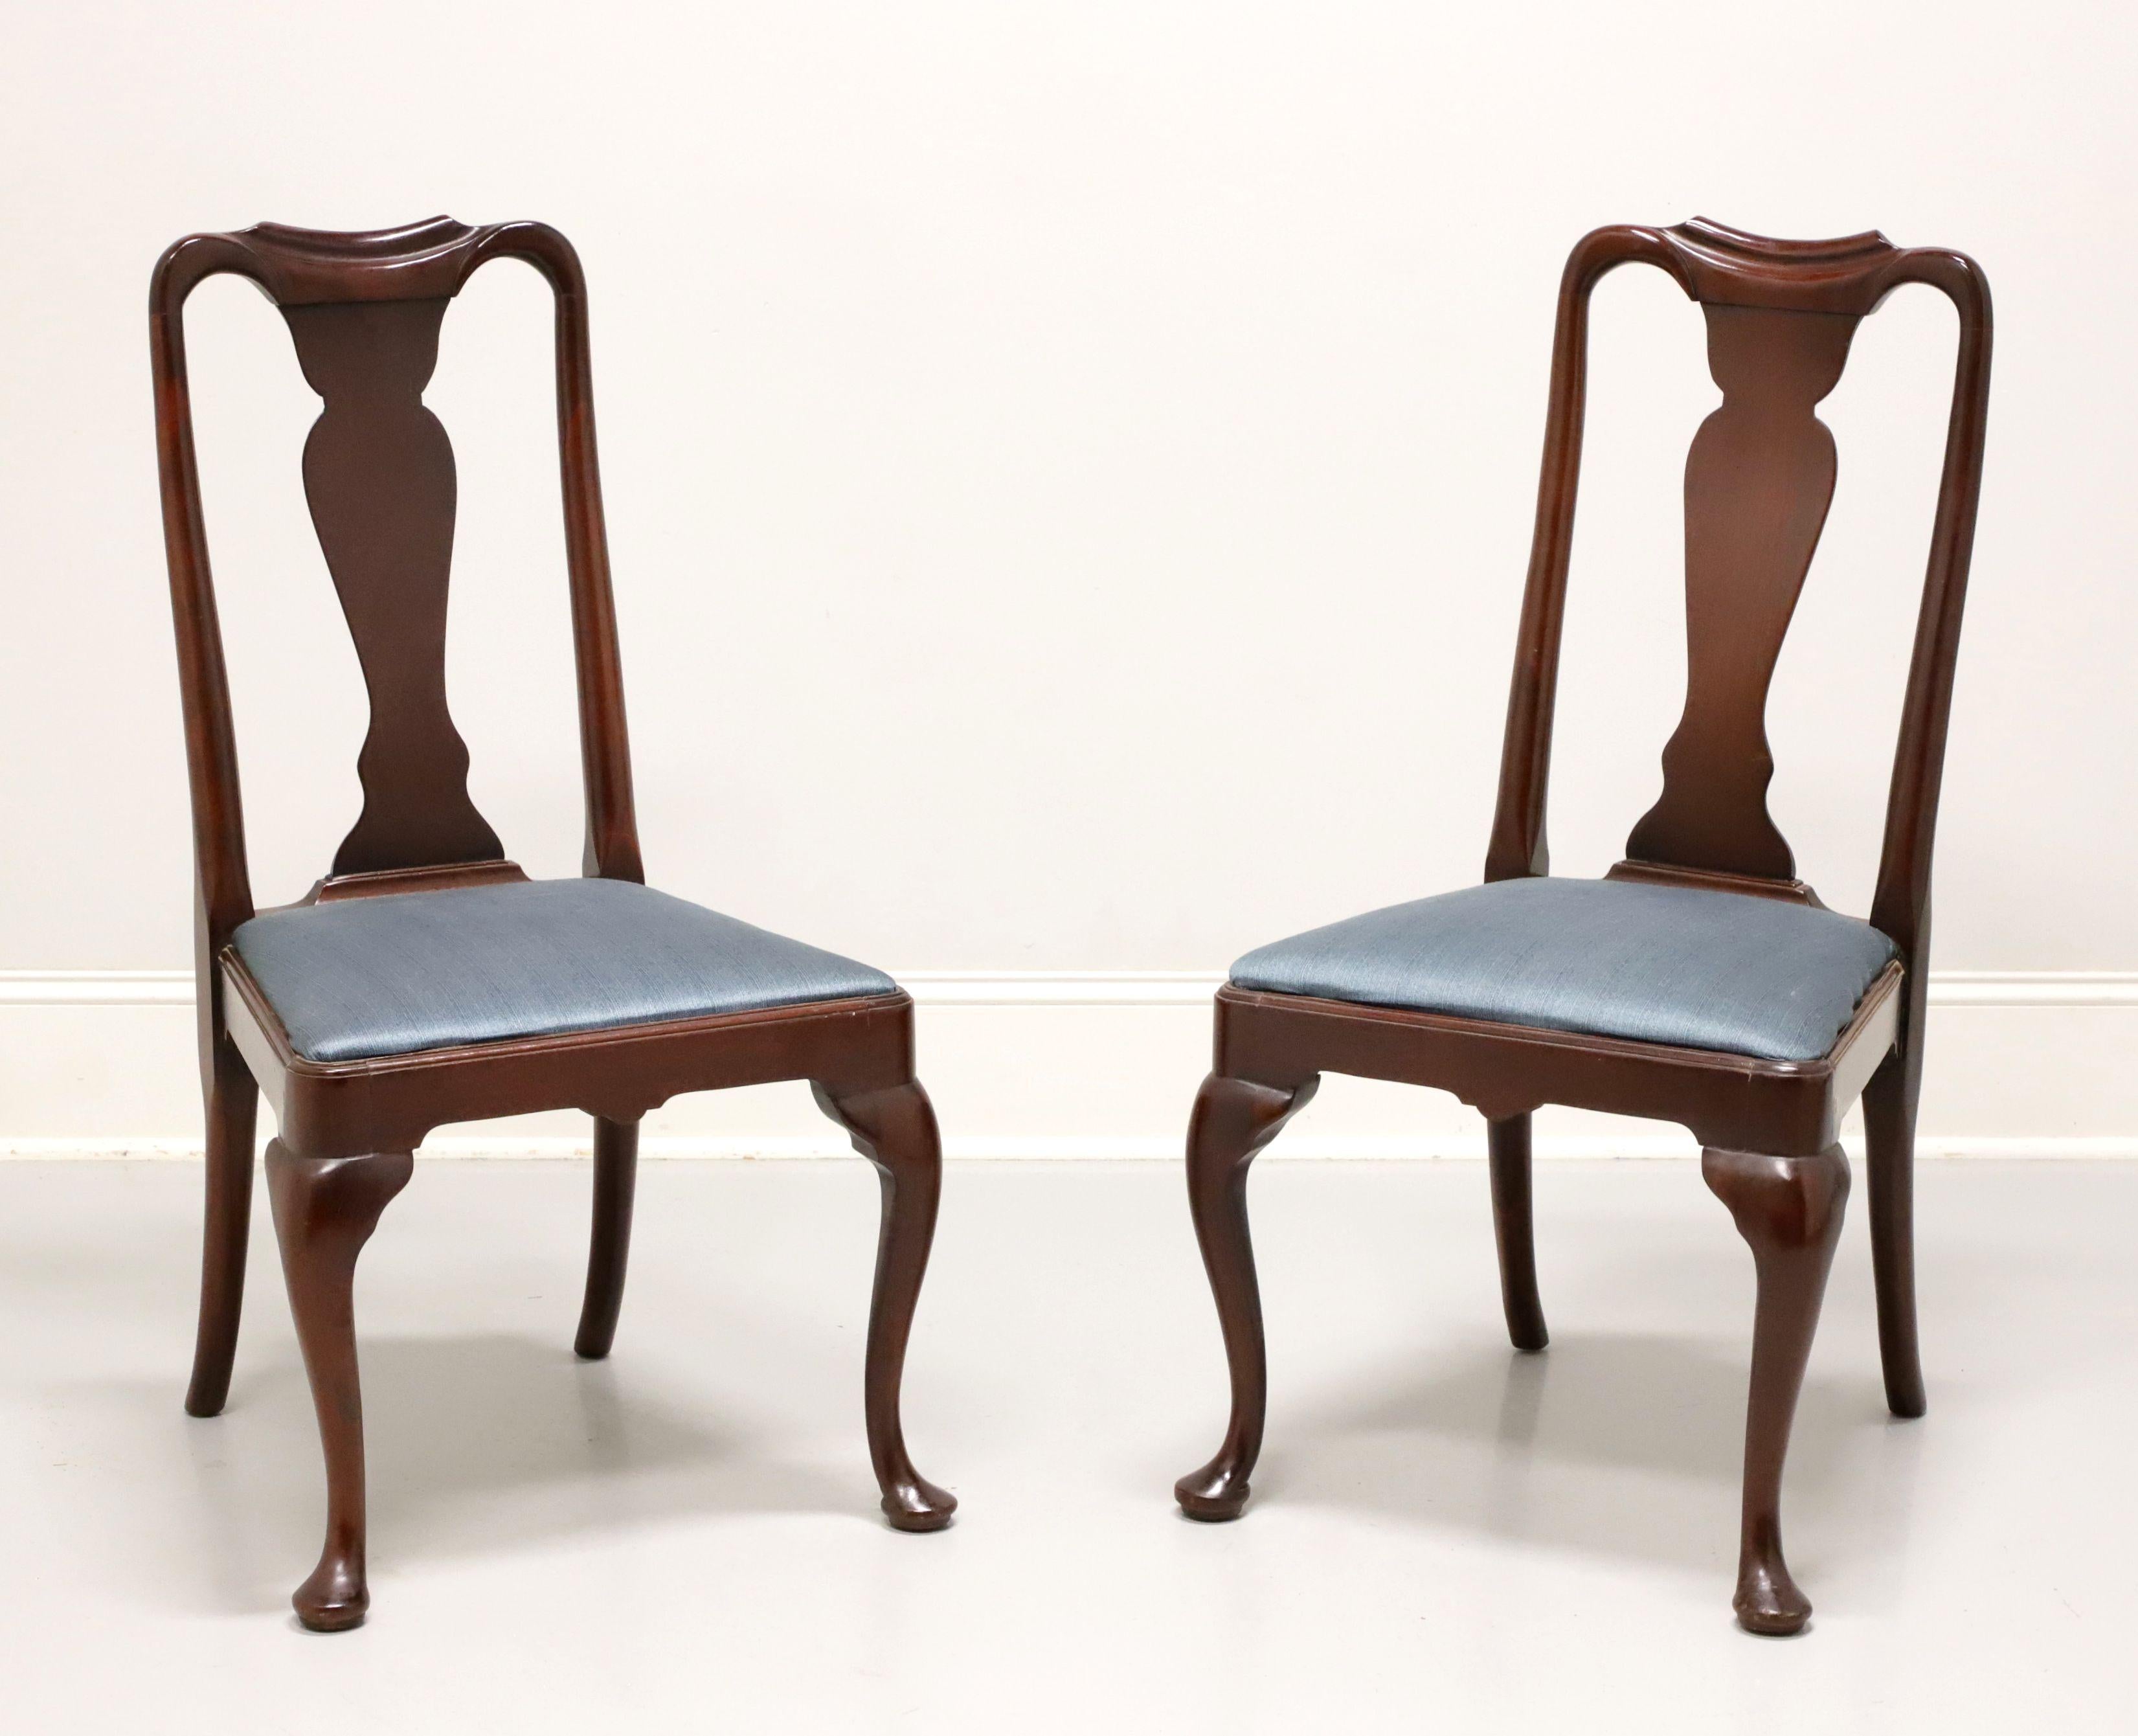 HICKORY CHAIR Solid Mahogany Queen Anne Style Dining Side Chairs - Pair B 4